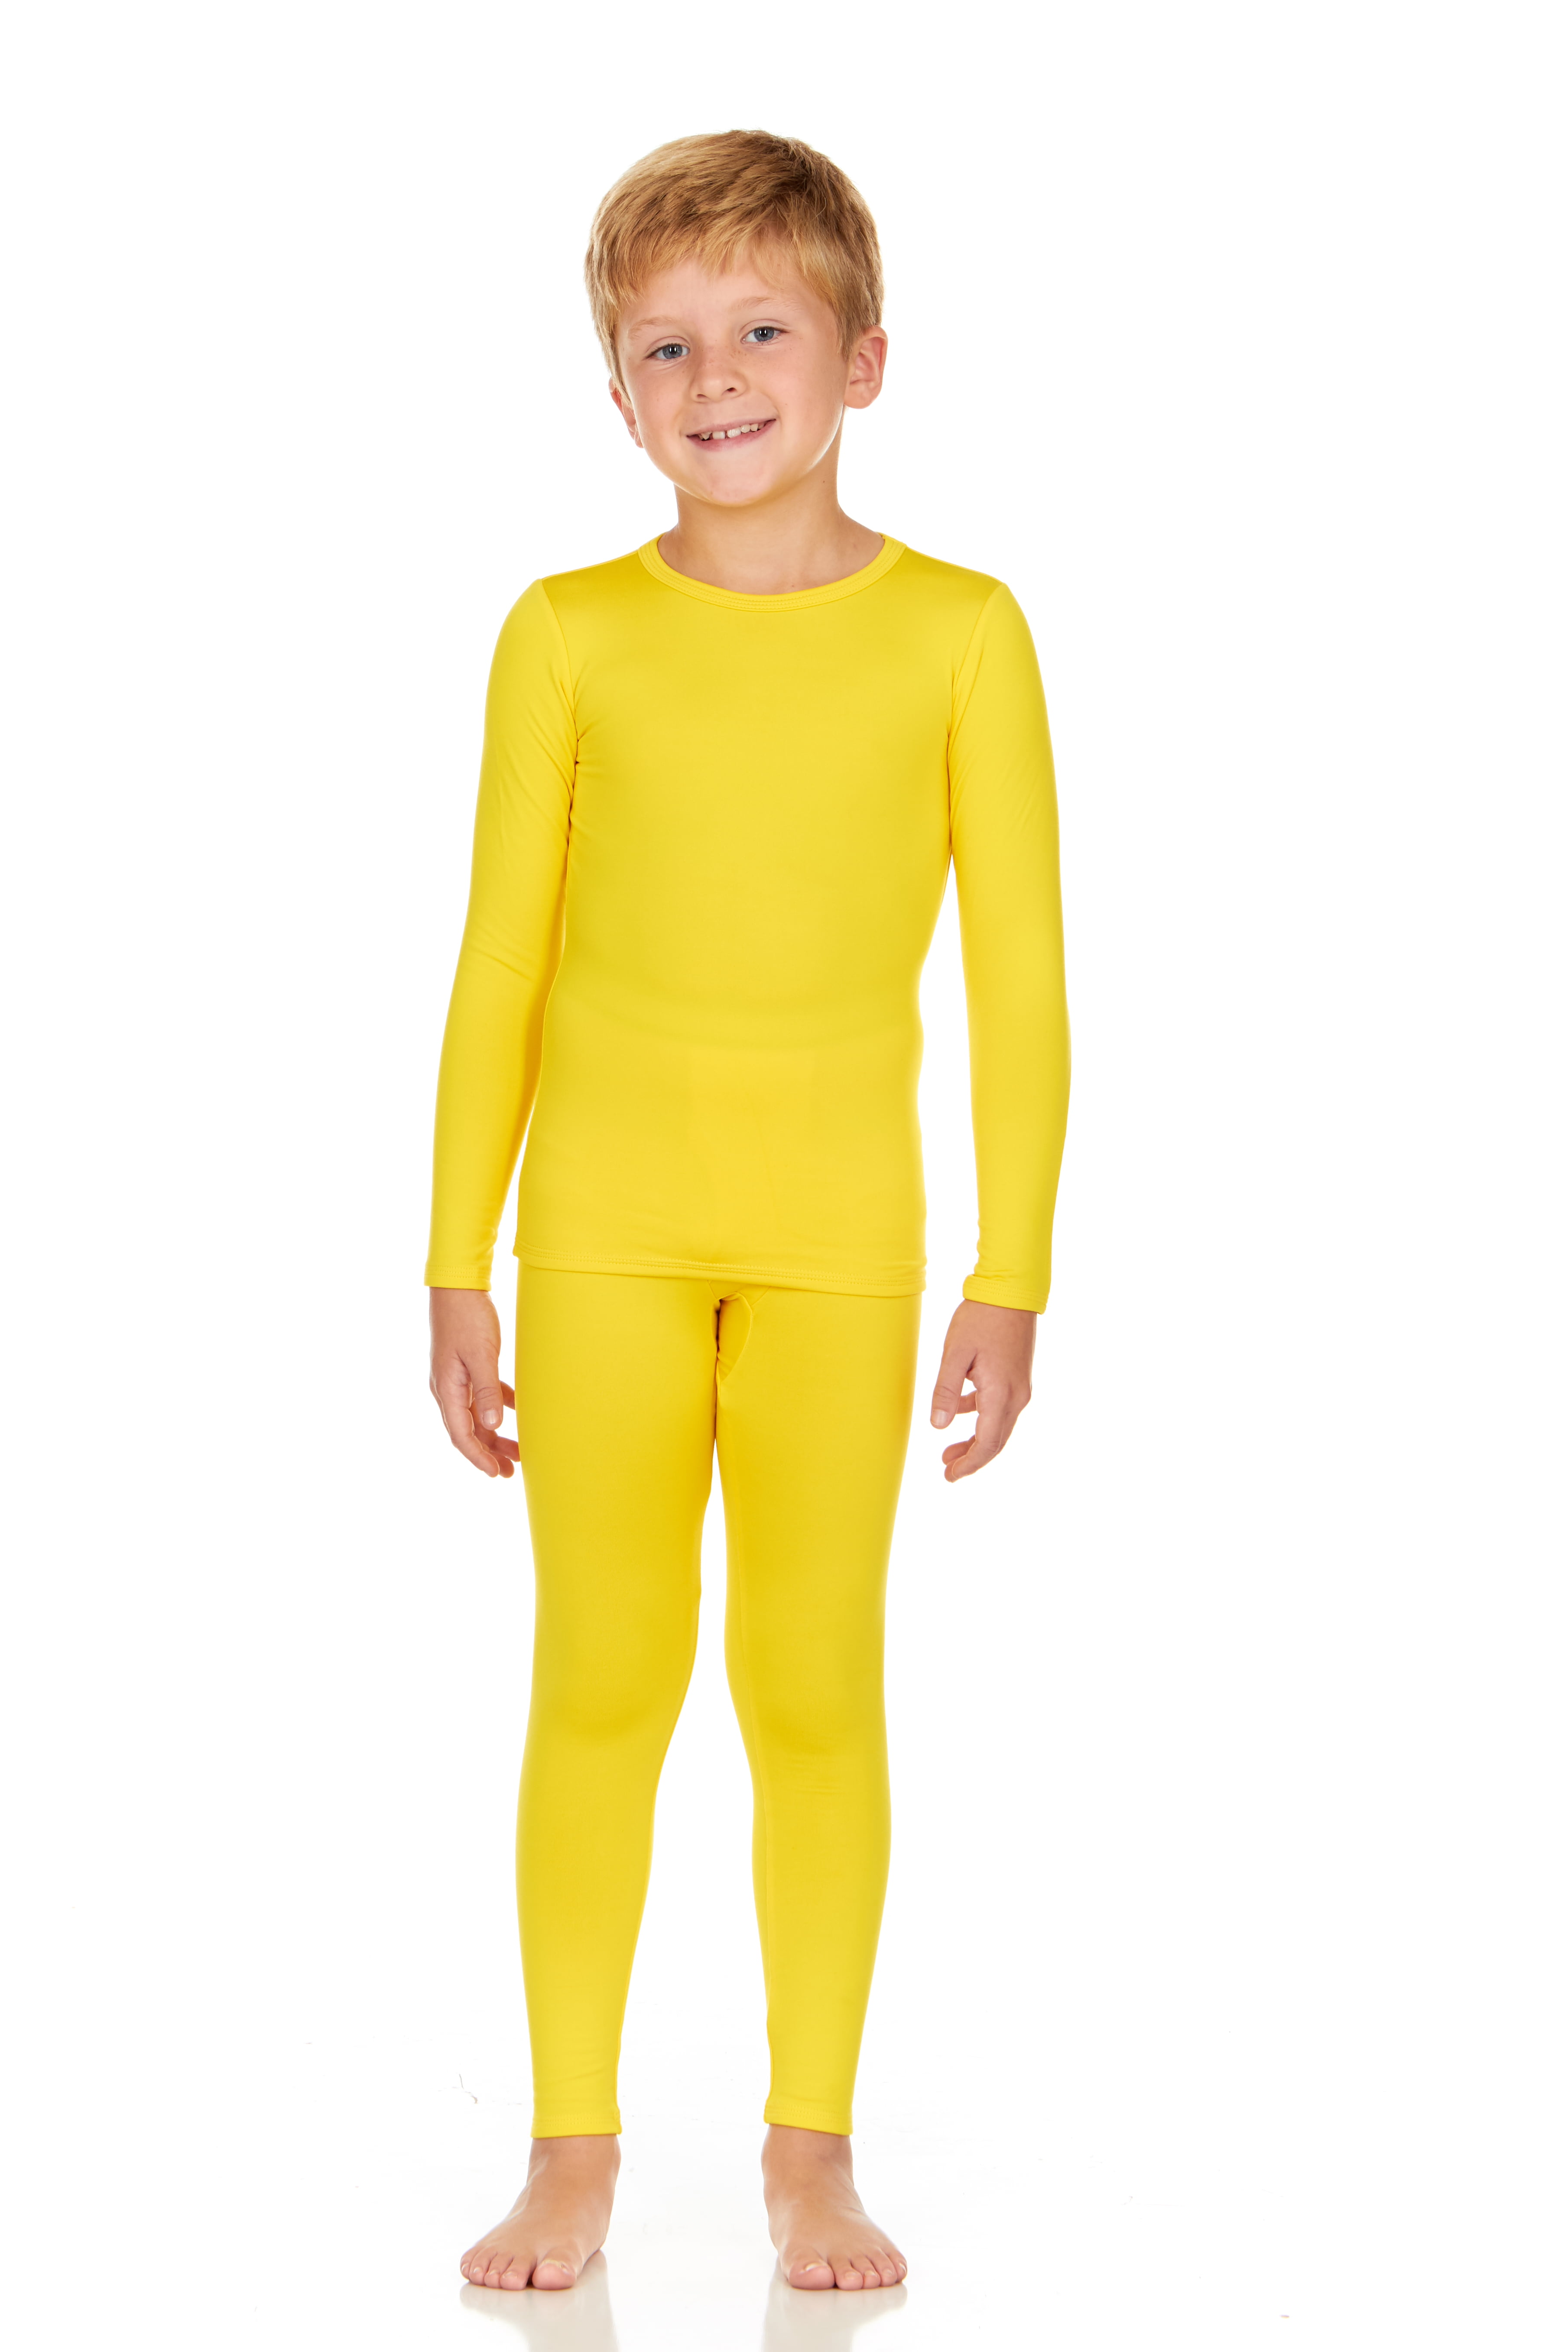 Thermajohn Boy's Ultra Soft Thermal Underwear Long Johns Set with Fleece Lined 